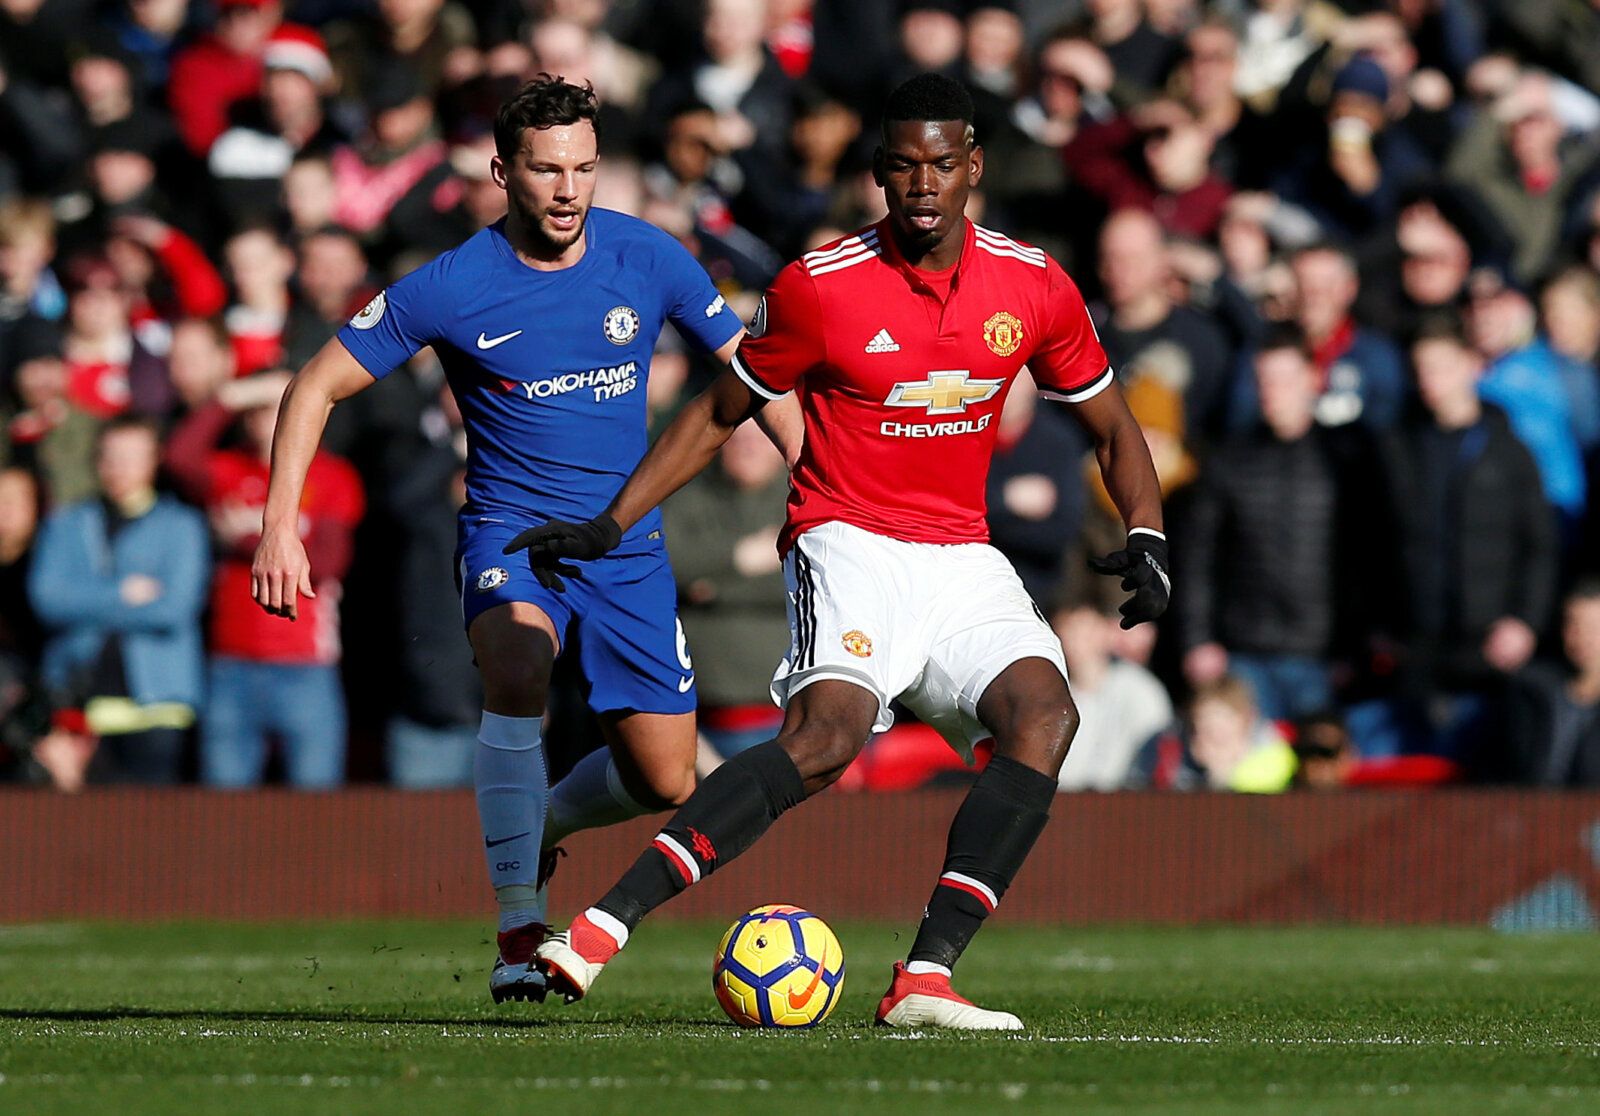 Soccer Football - Premier League - Manchester United vs Chelsea - Old Trafford, Manchester, Britain - February 25, 2018   Manchester United's Paul Pogba in action with Chelsea’s Danny Drinkwater    REUTERS/Andrew Yates    EDITORIAL USE ONLY. No use with unauthorized audio, video, data, fixture lists, club/league logos or 